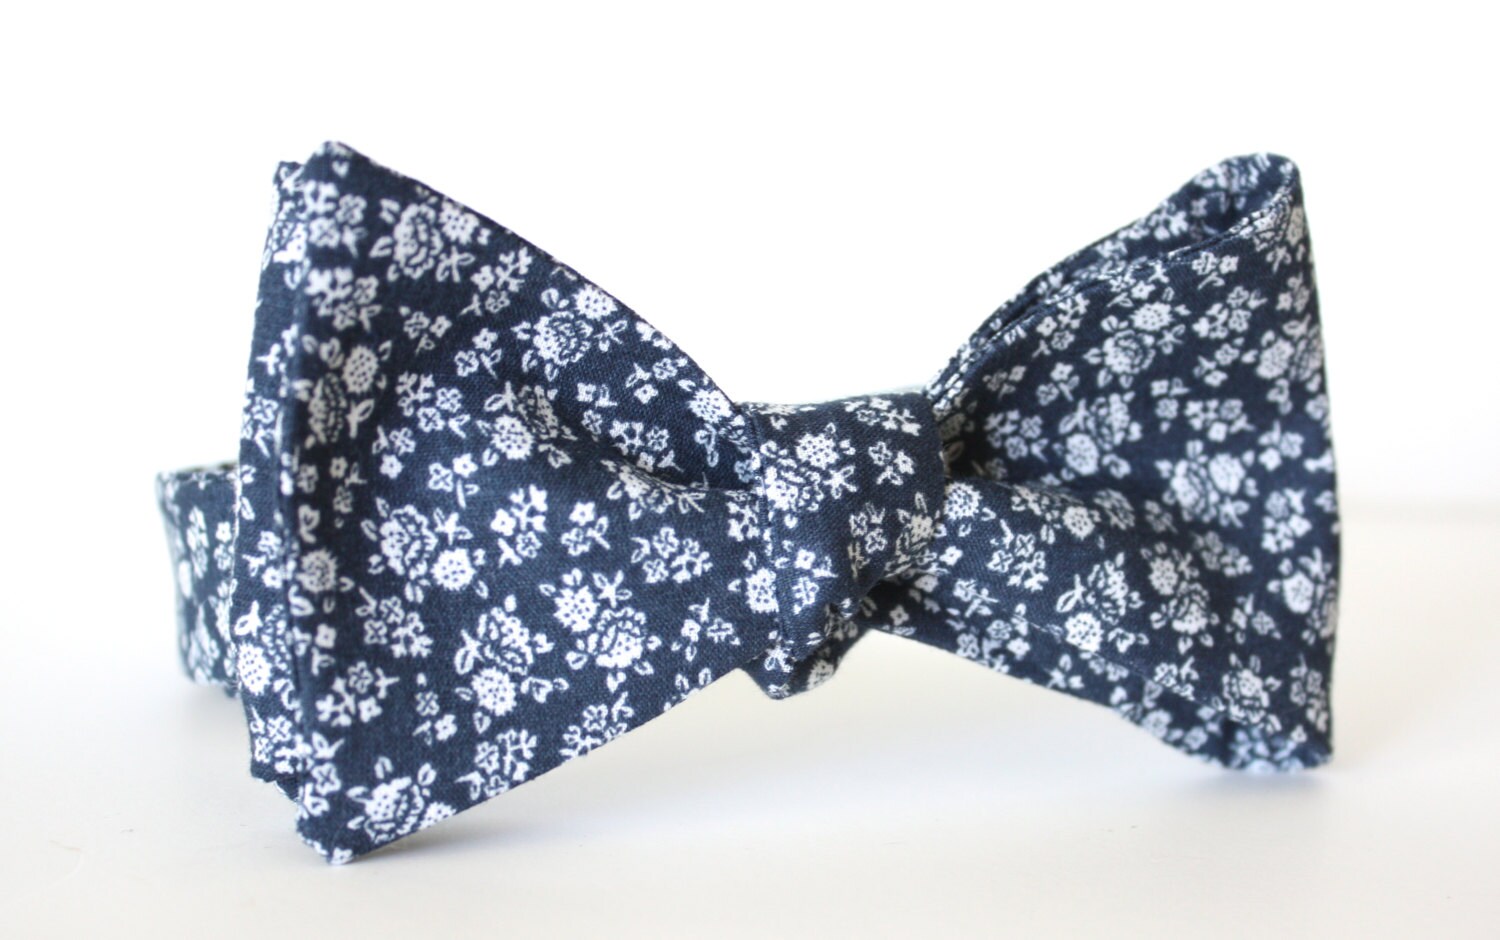 Blue Floral Bow Tie Handmade by Lord by LWbyLordWallington on Etsy